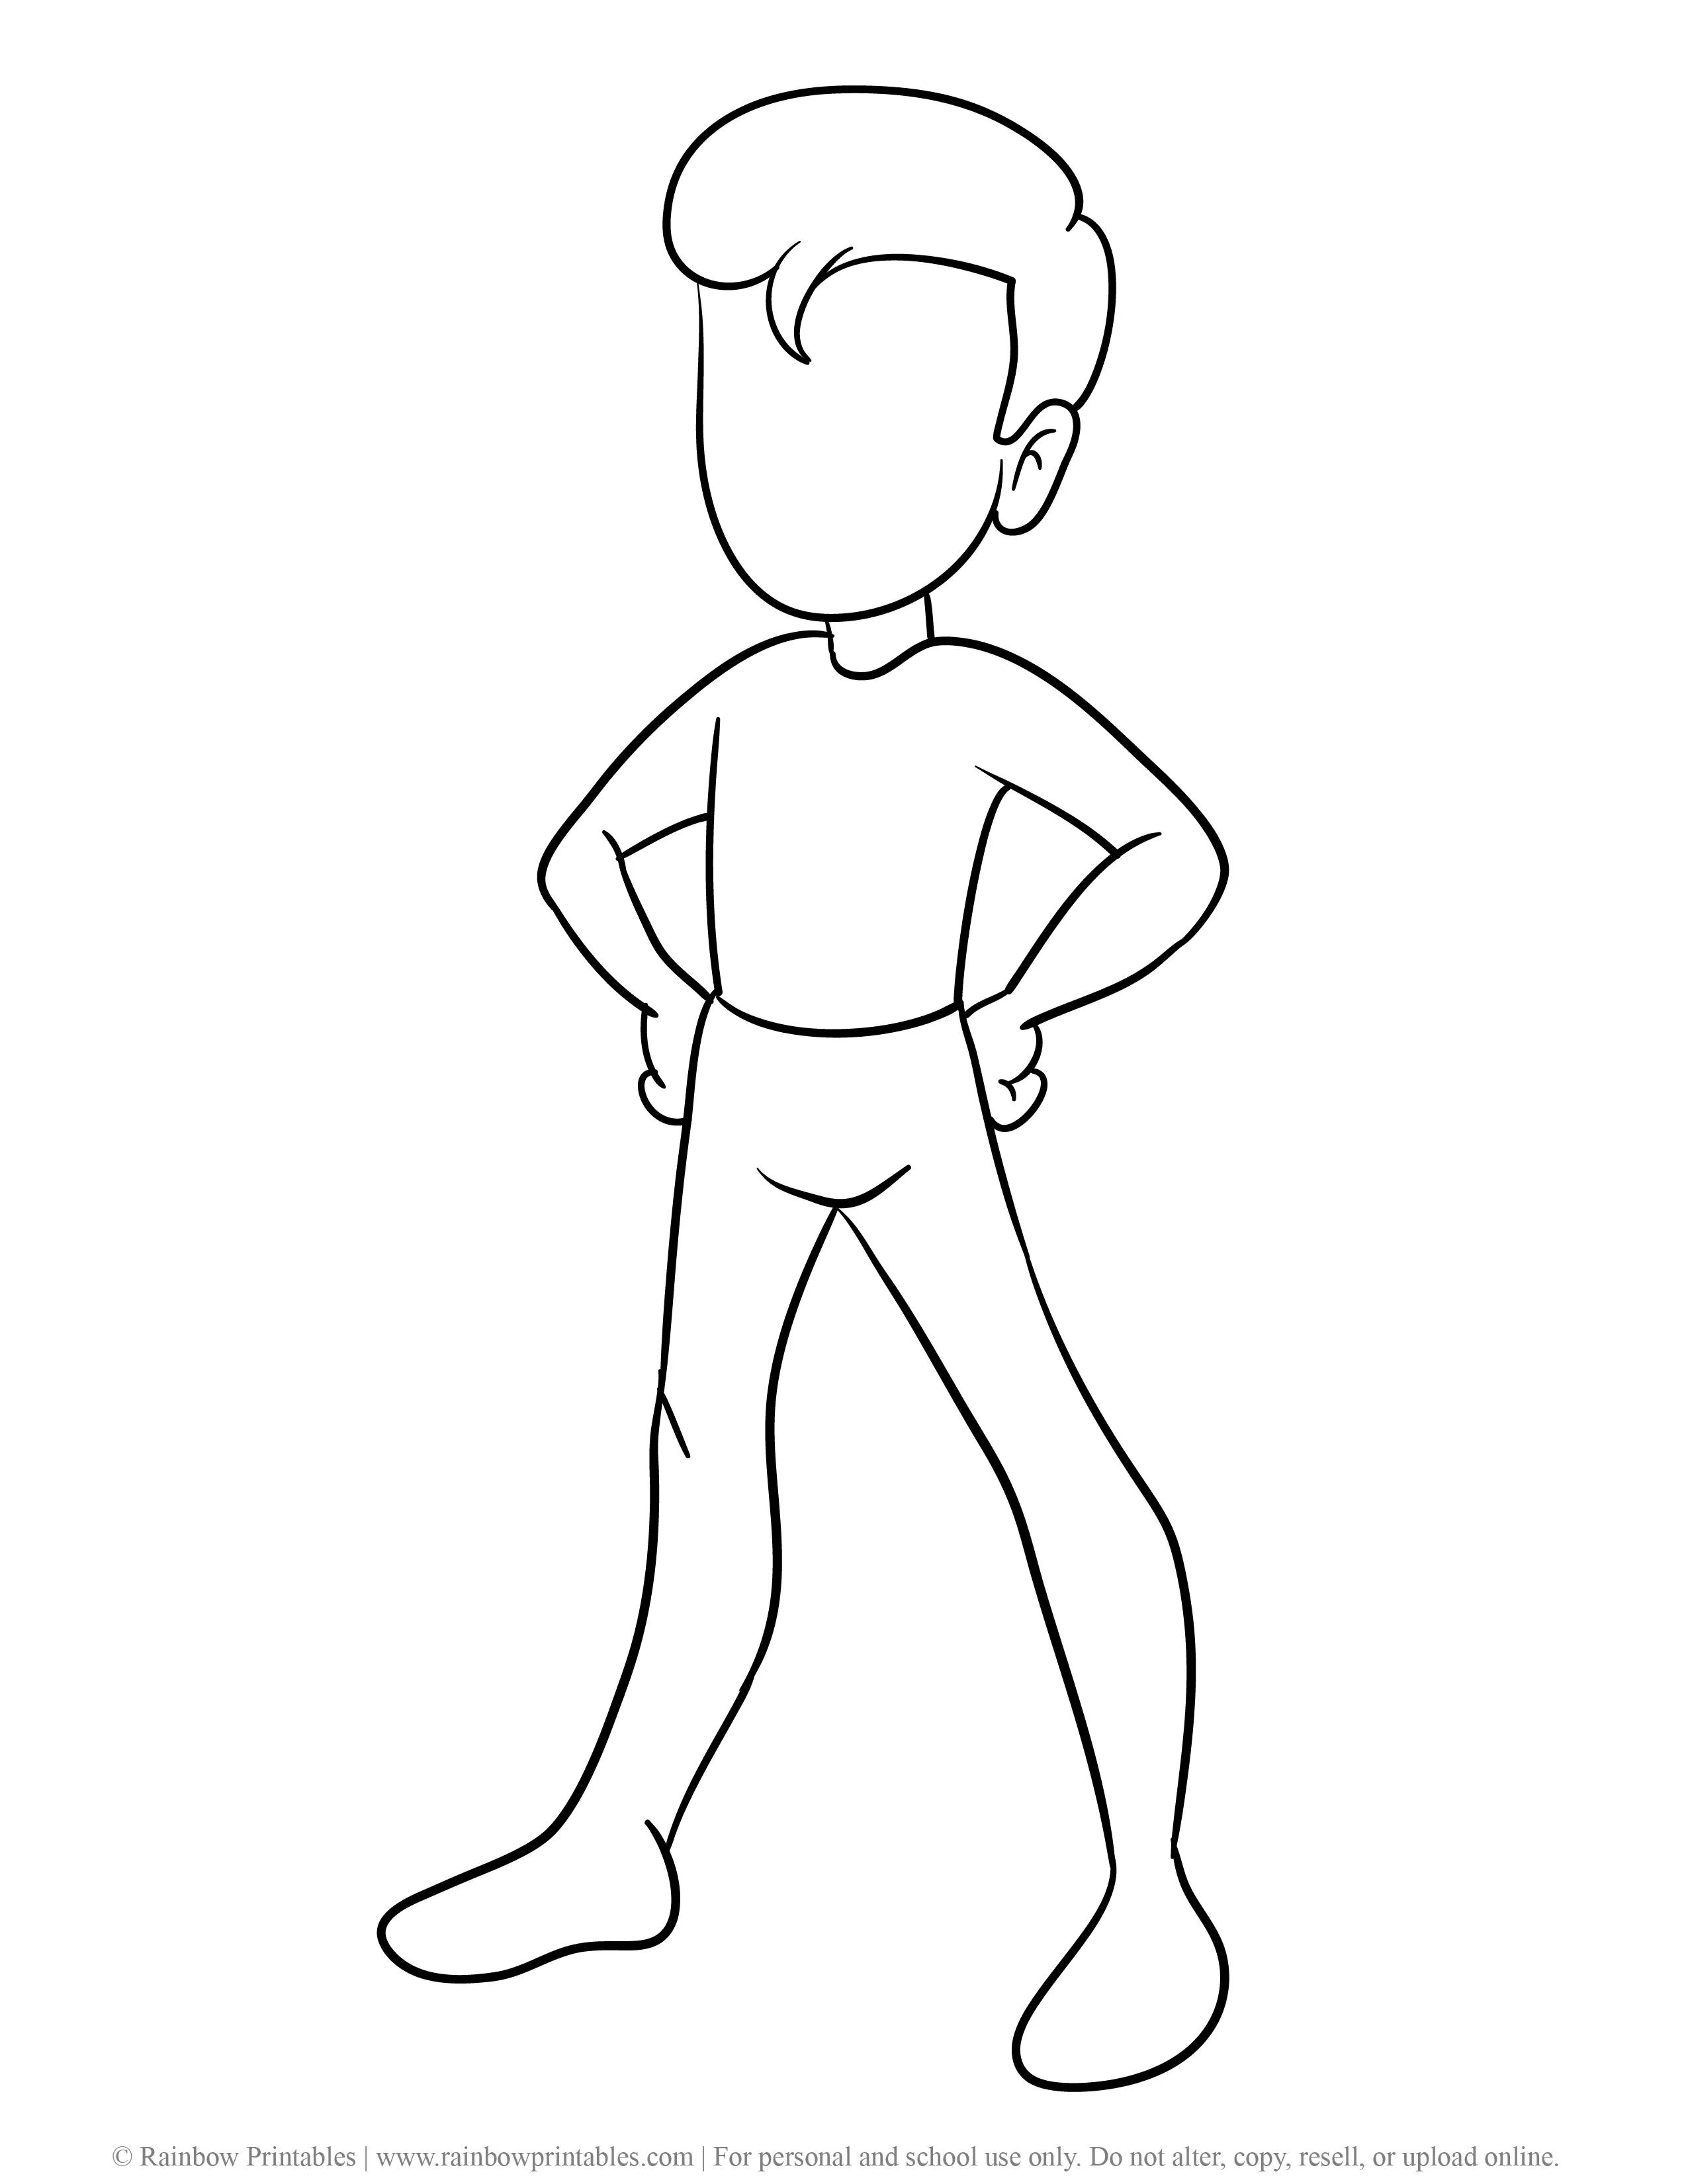 Free Coloring Pages for Kids Drawing Activities Line Art Illustration KID BOY SUPERHERO OUTLINE TEMPLATES Be a Hero